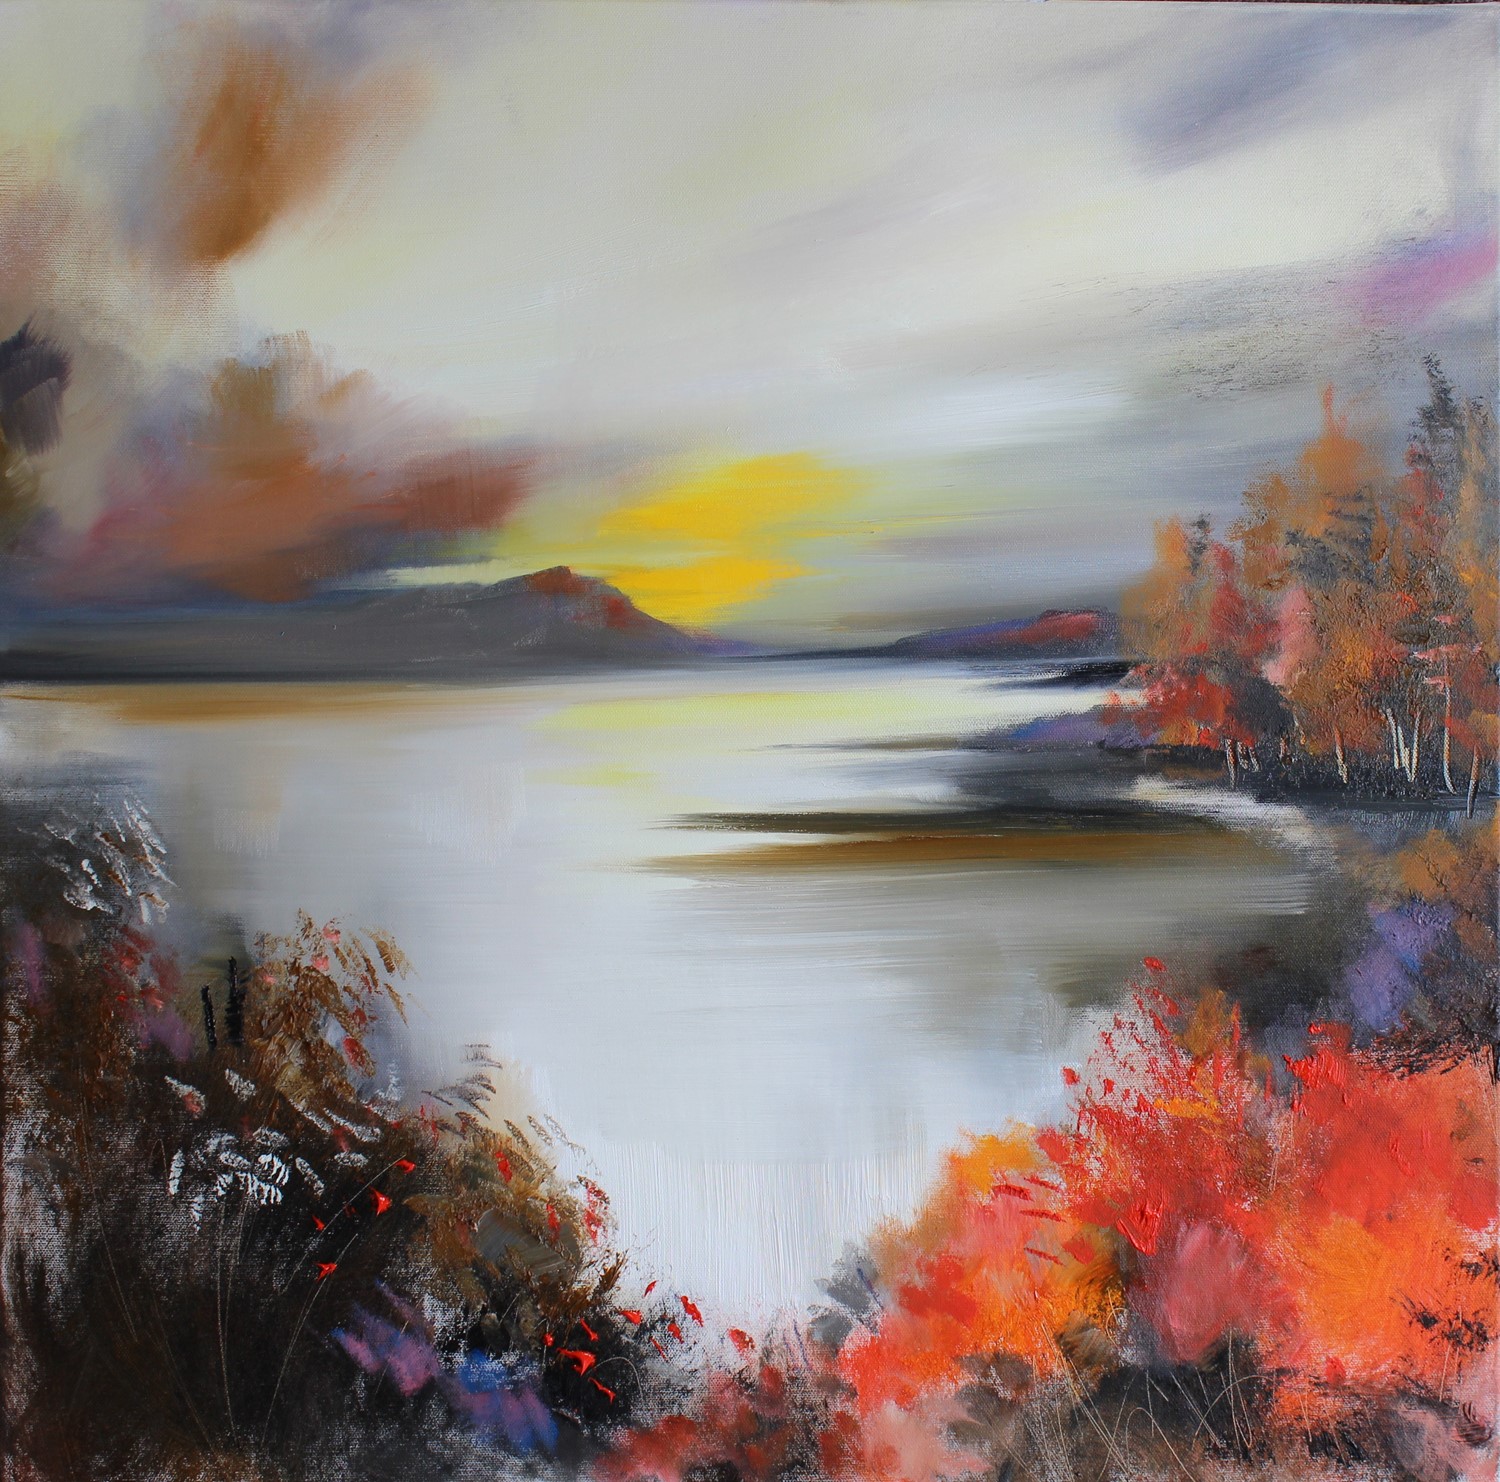 'A Morning in Autumn' by artist Rosanne Barr